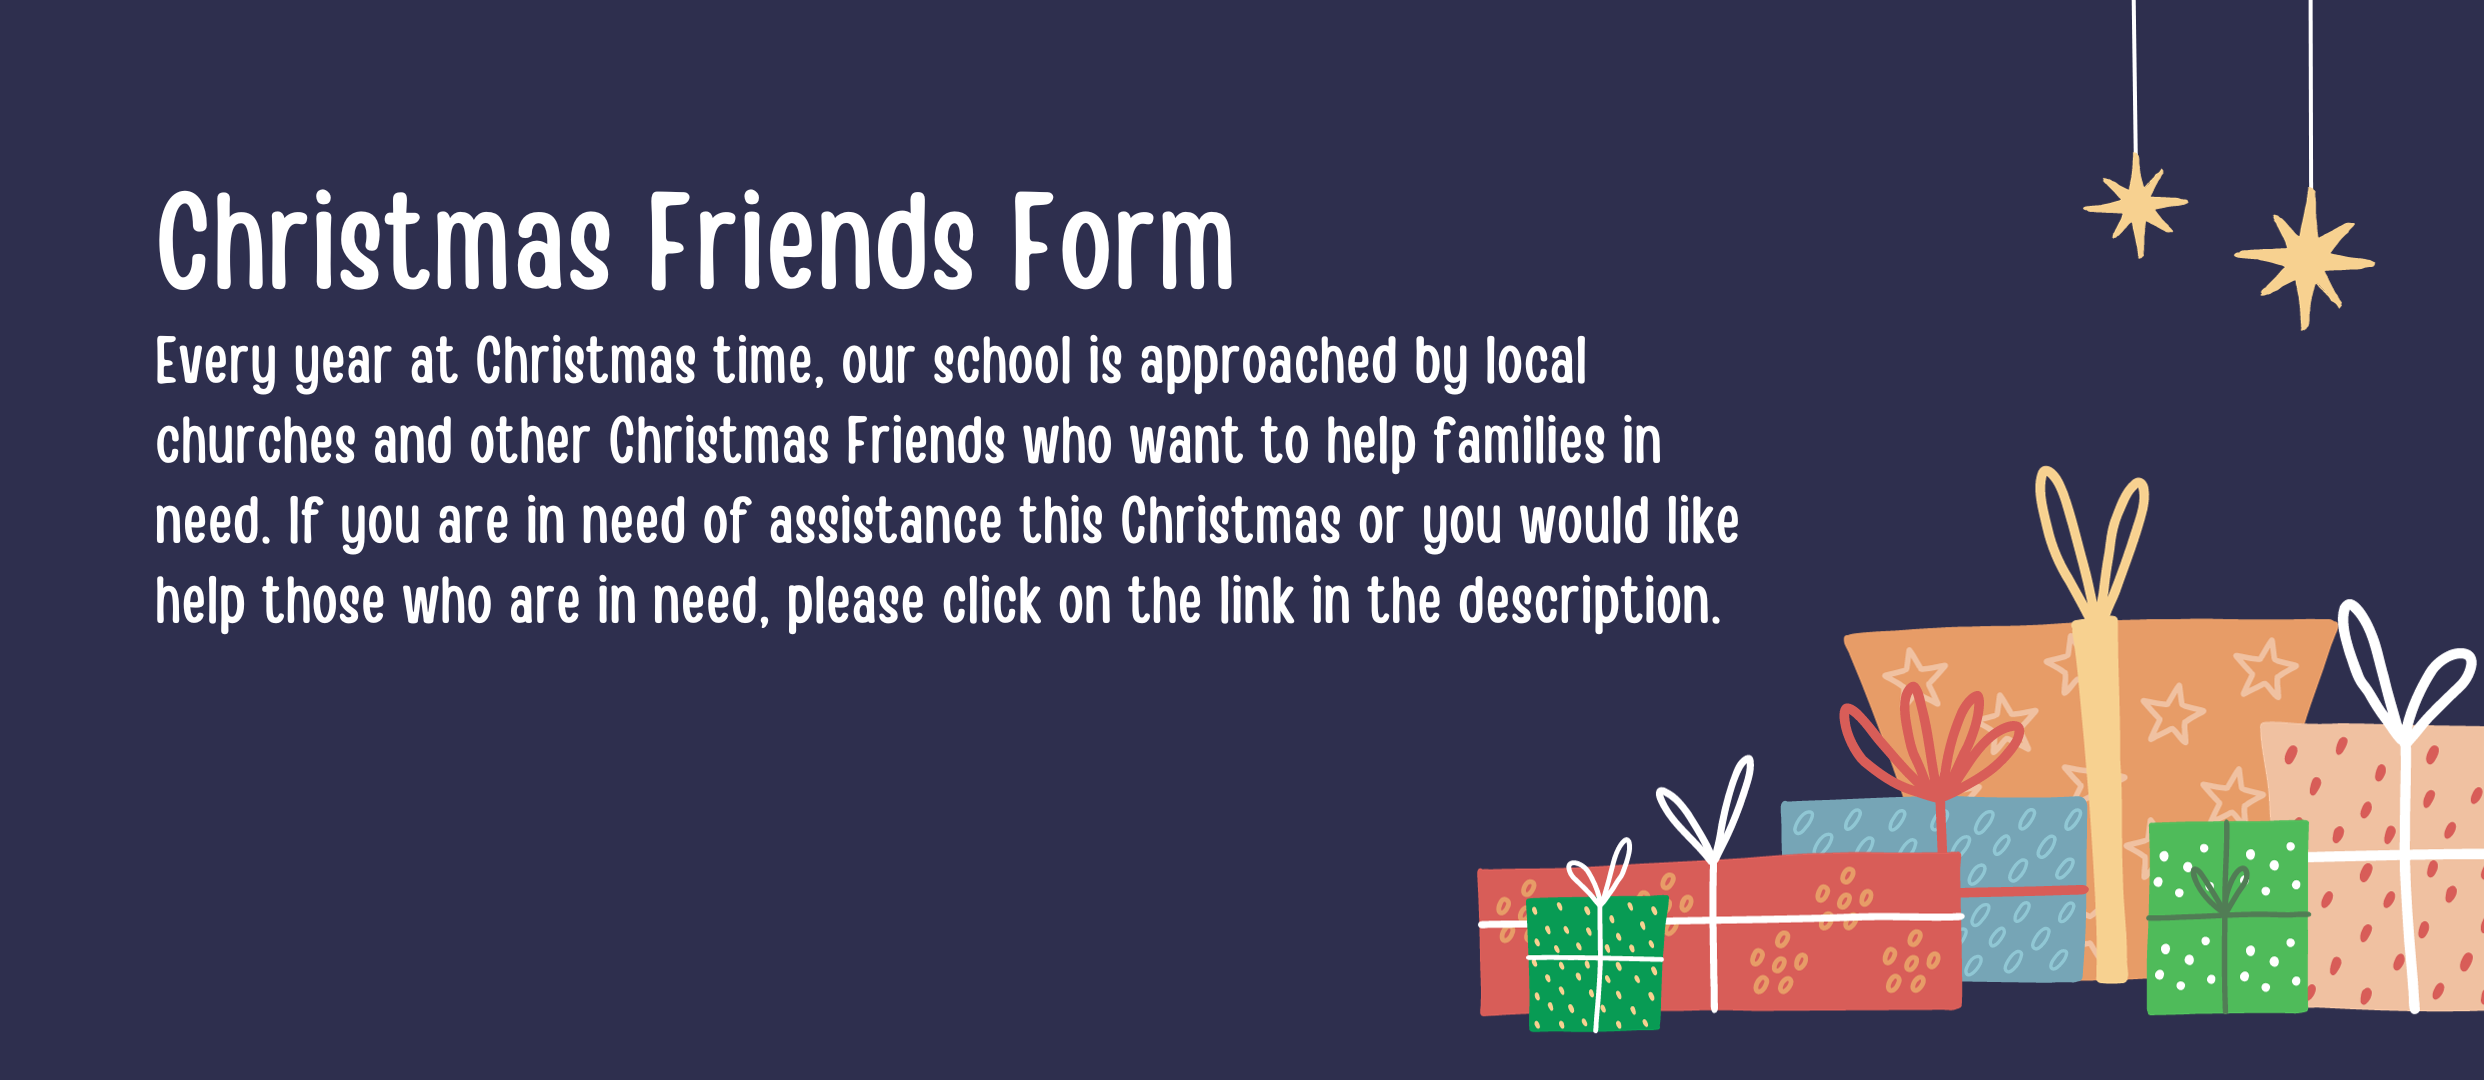 Christmas Friends Form Every year at Christmas time, our school is approached by local churches and other Christmas Friends who want to help families in need. If you are in need of assistance this Christmas or you would like help those who are in need, please click on the link in the description.